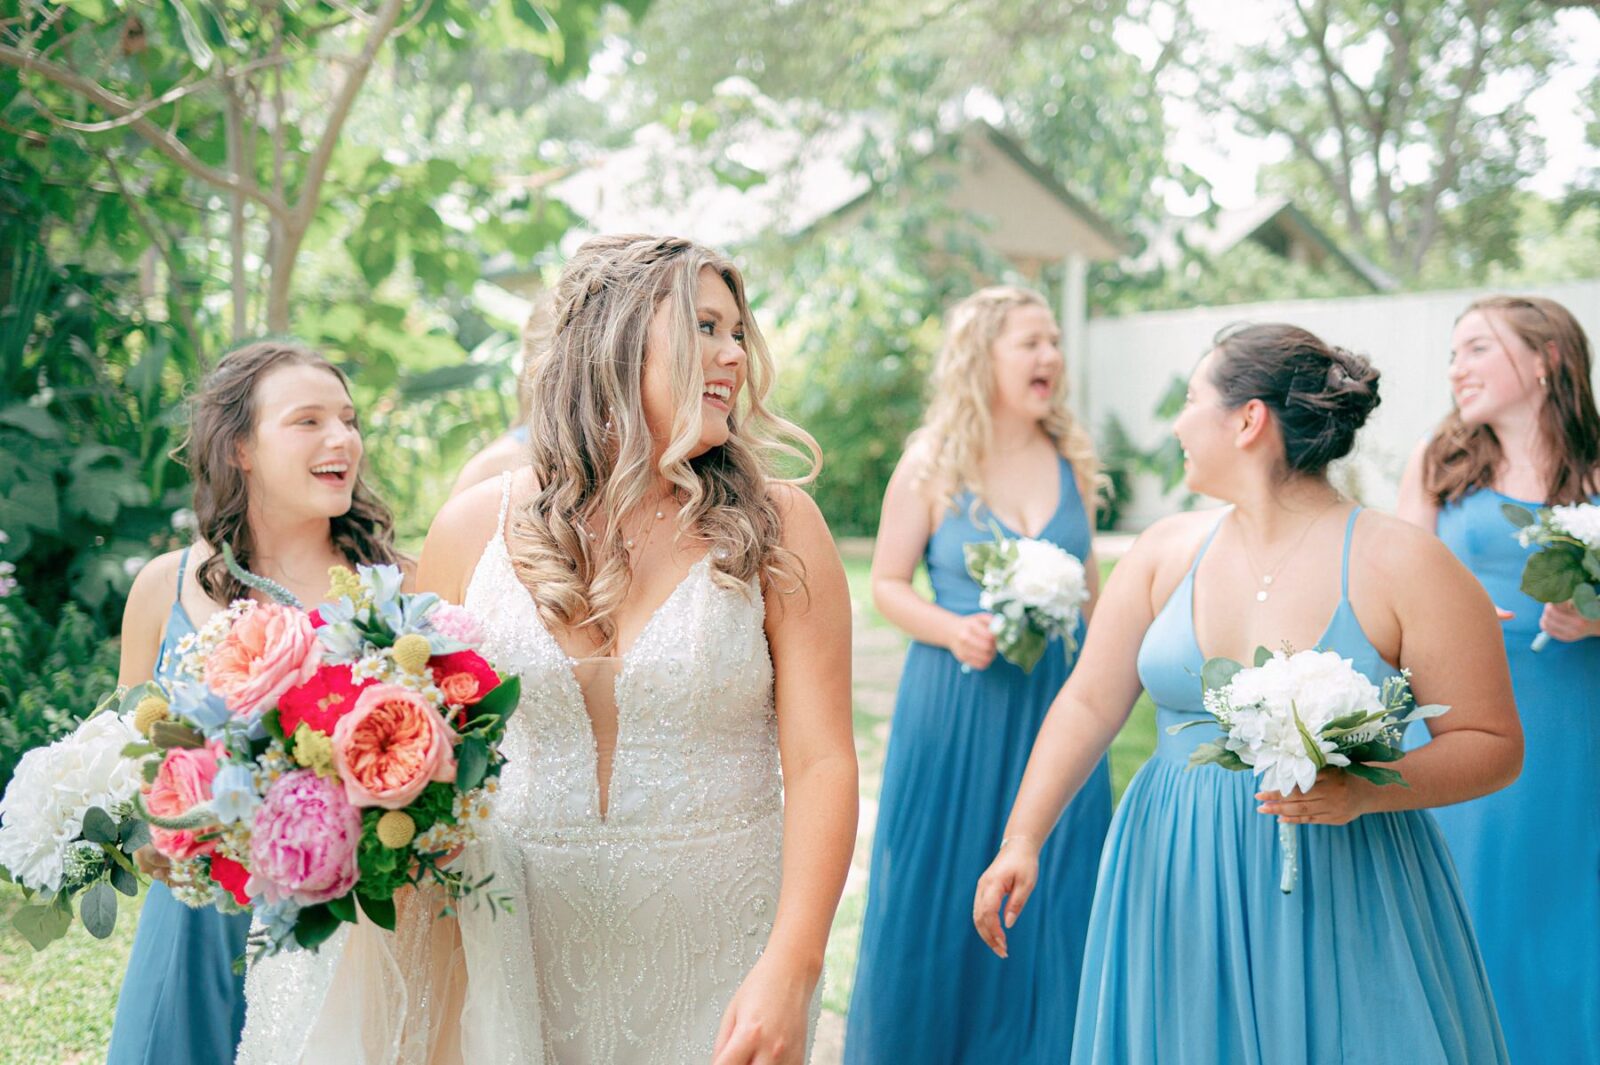 bride looking back at her bridesmaids, blue bridesmaid dresses, Austin Wedding at Hummingbird House, with wedding photos by Tara Lyons Photography. Other vendors: Mistique Makeup, Cana Events, Twin Flame Events, Simply Chic Event Rentals, Live Oak Photo Booth